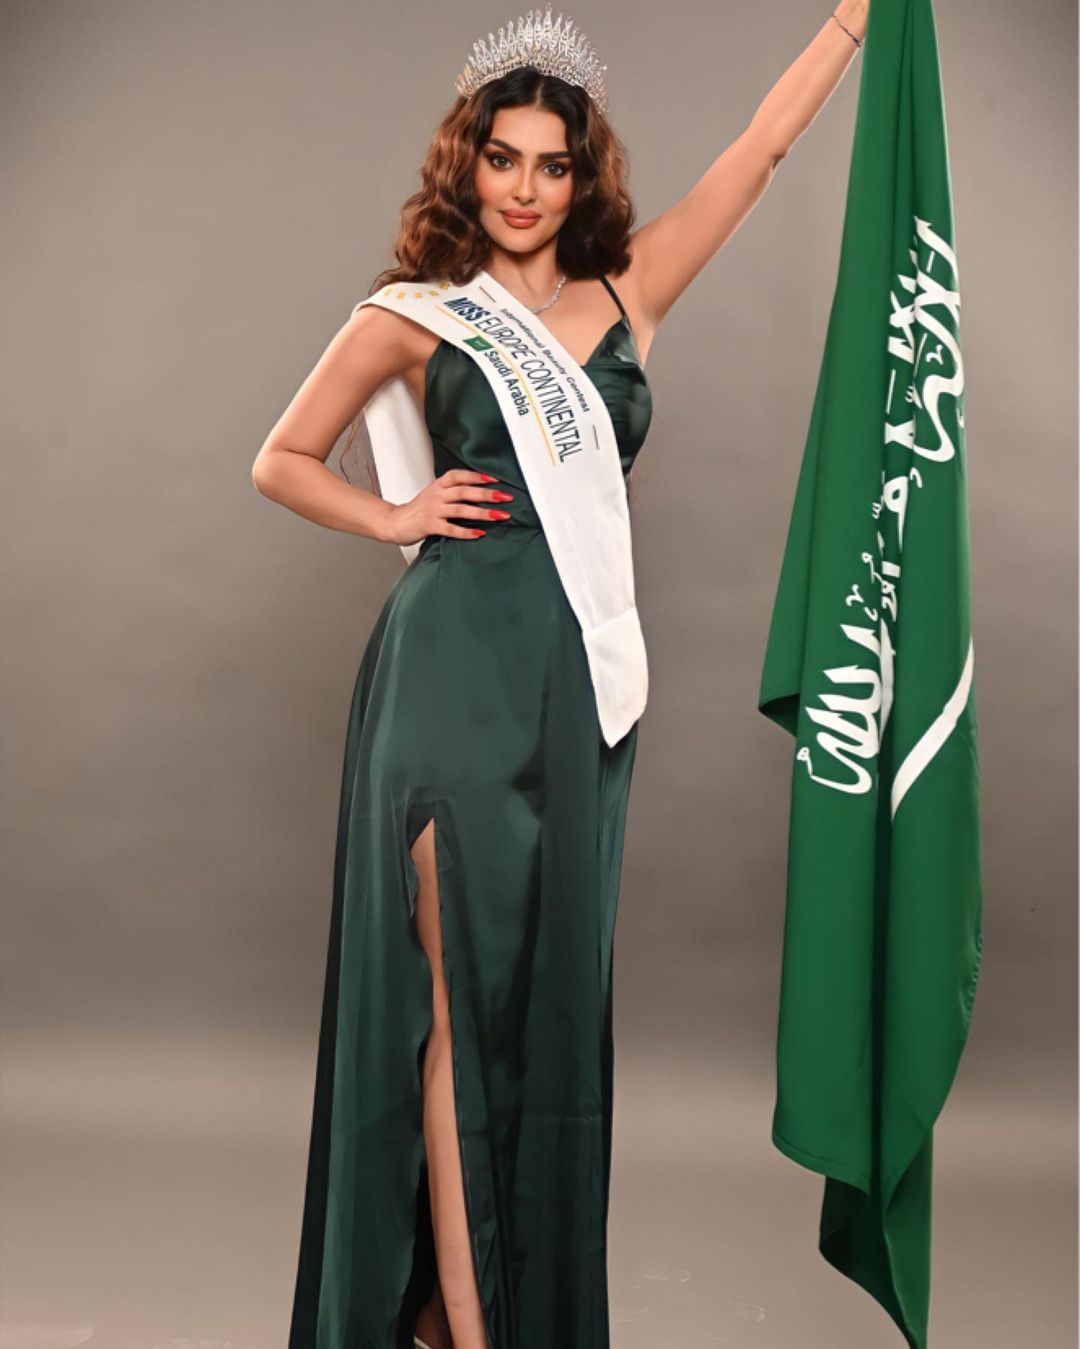 first saudi woman to participate in miss universe